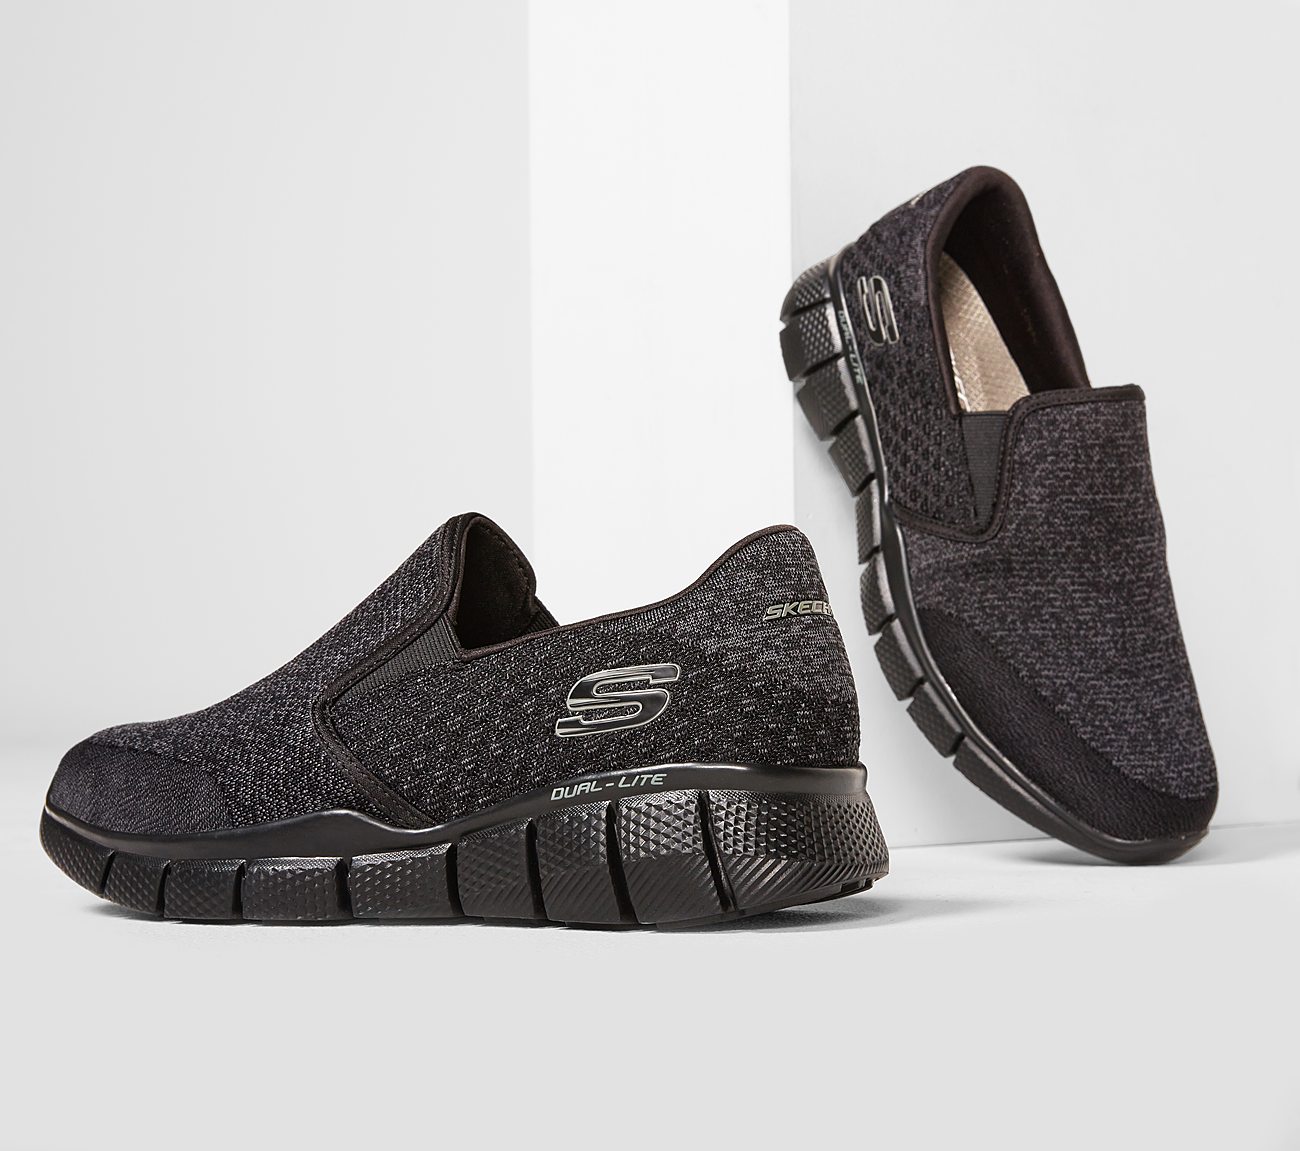 skechers equalizer 2.0 mujer negro